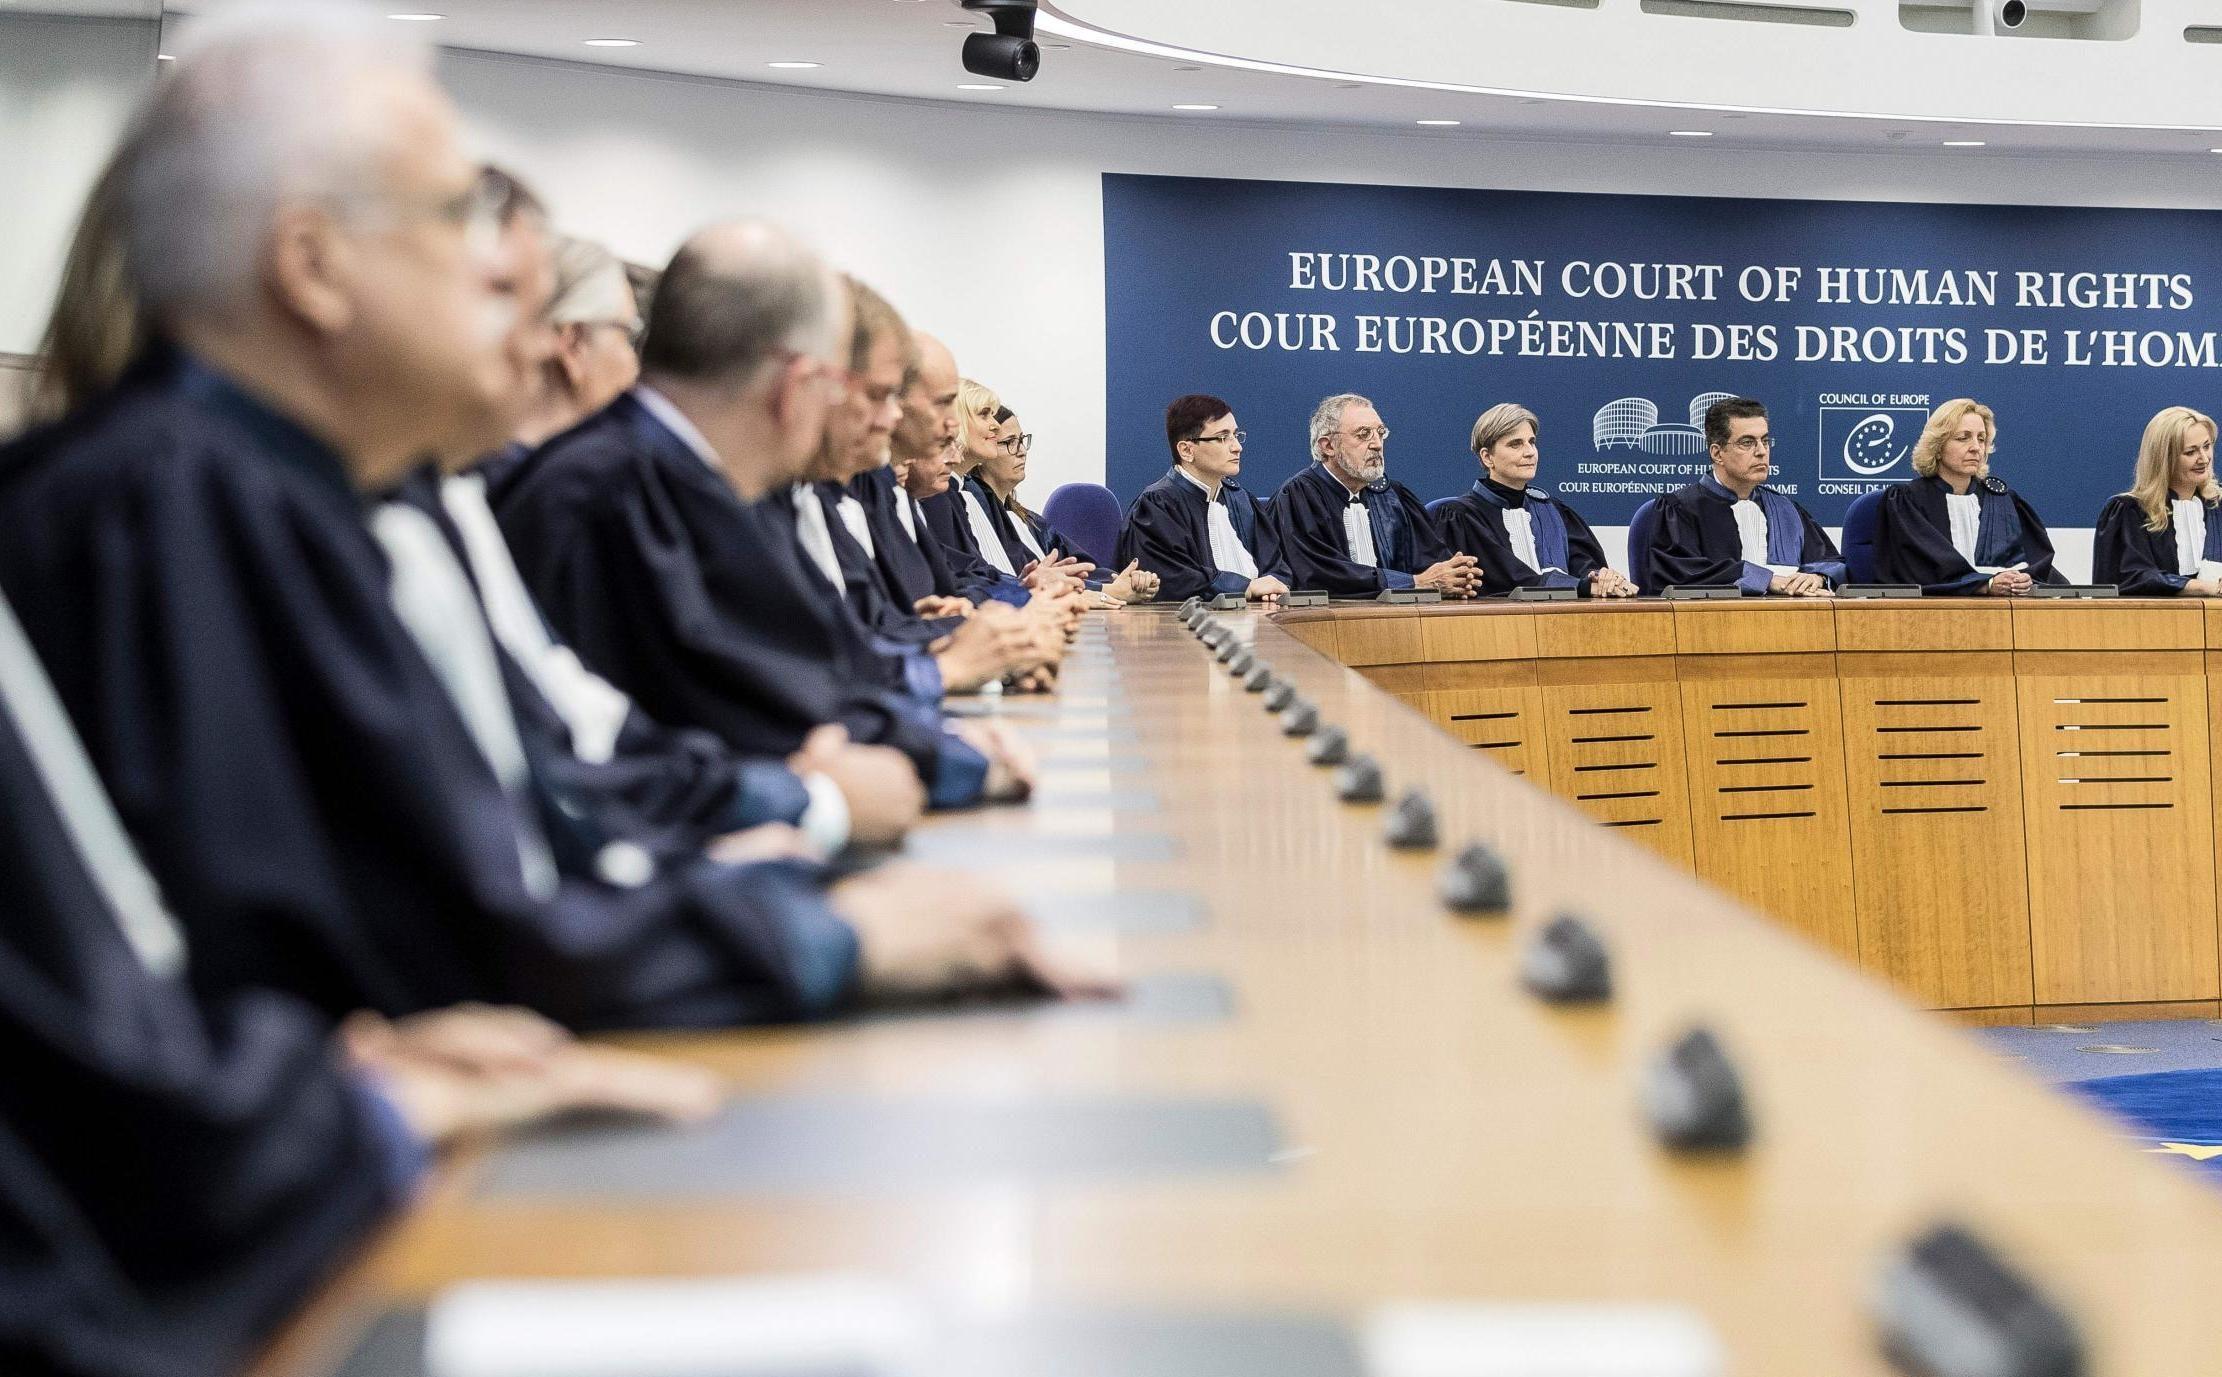 The Council of Europe has set up an expert group to assist the Prosecutor General’s Office of Ukraine in investigating war crimes